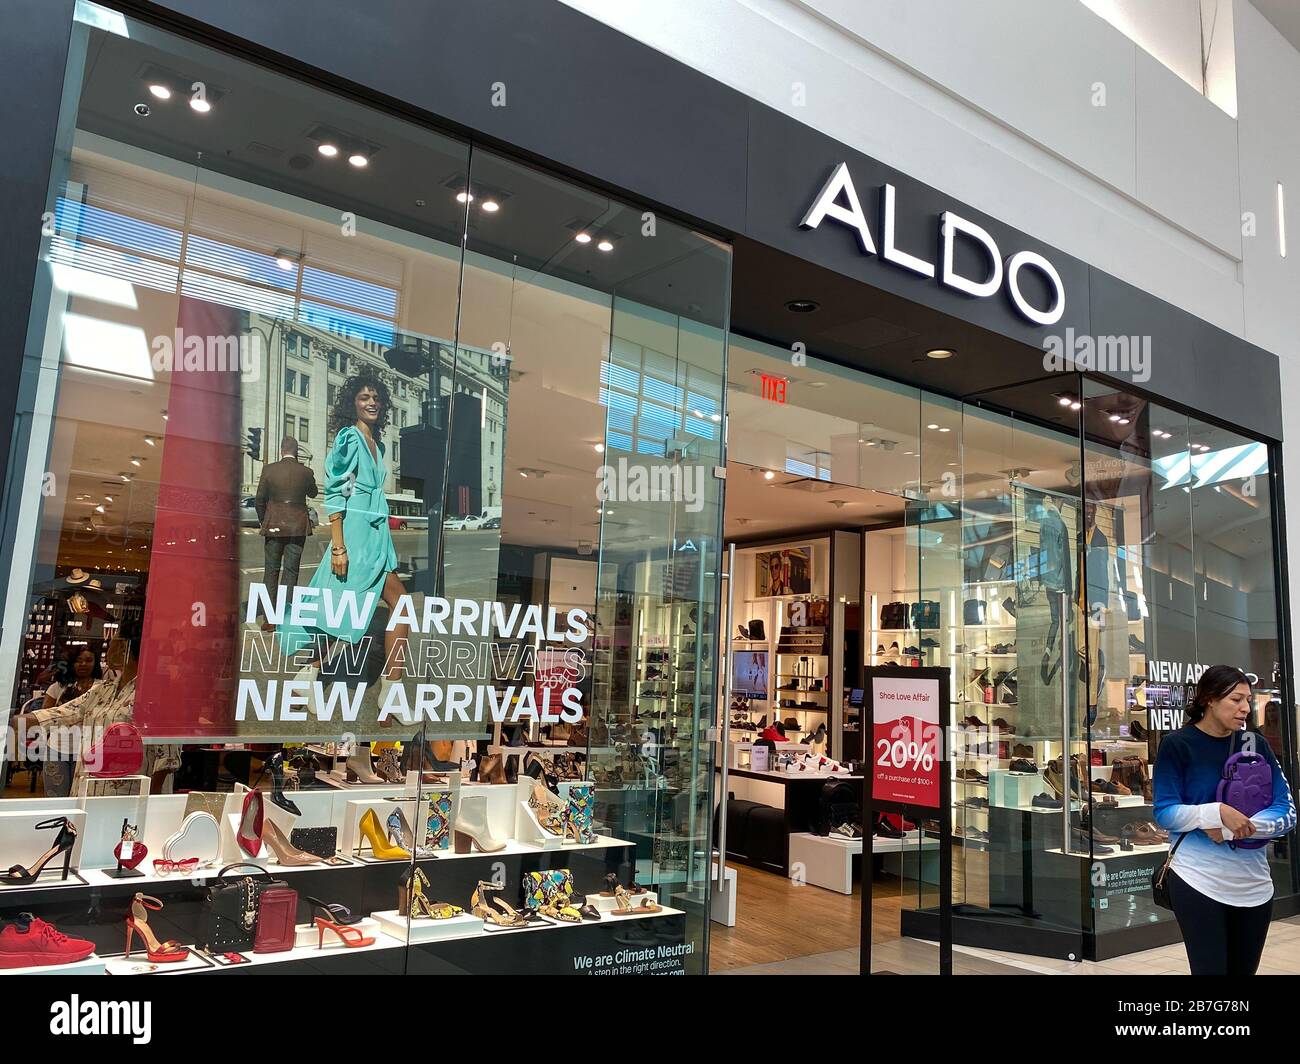 Orlando, FL/USA-2/17/20: An Aldo retail fashion shoes and accessories store  in an indoor mall in Orlando, FL Stock Photo - Alamy